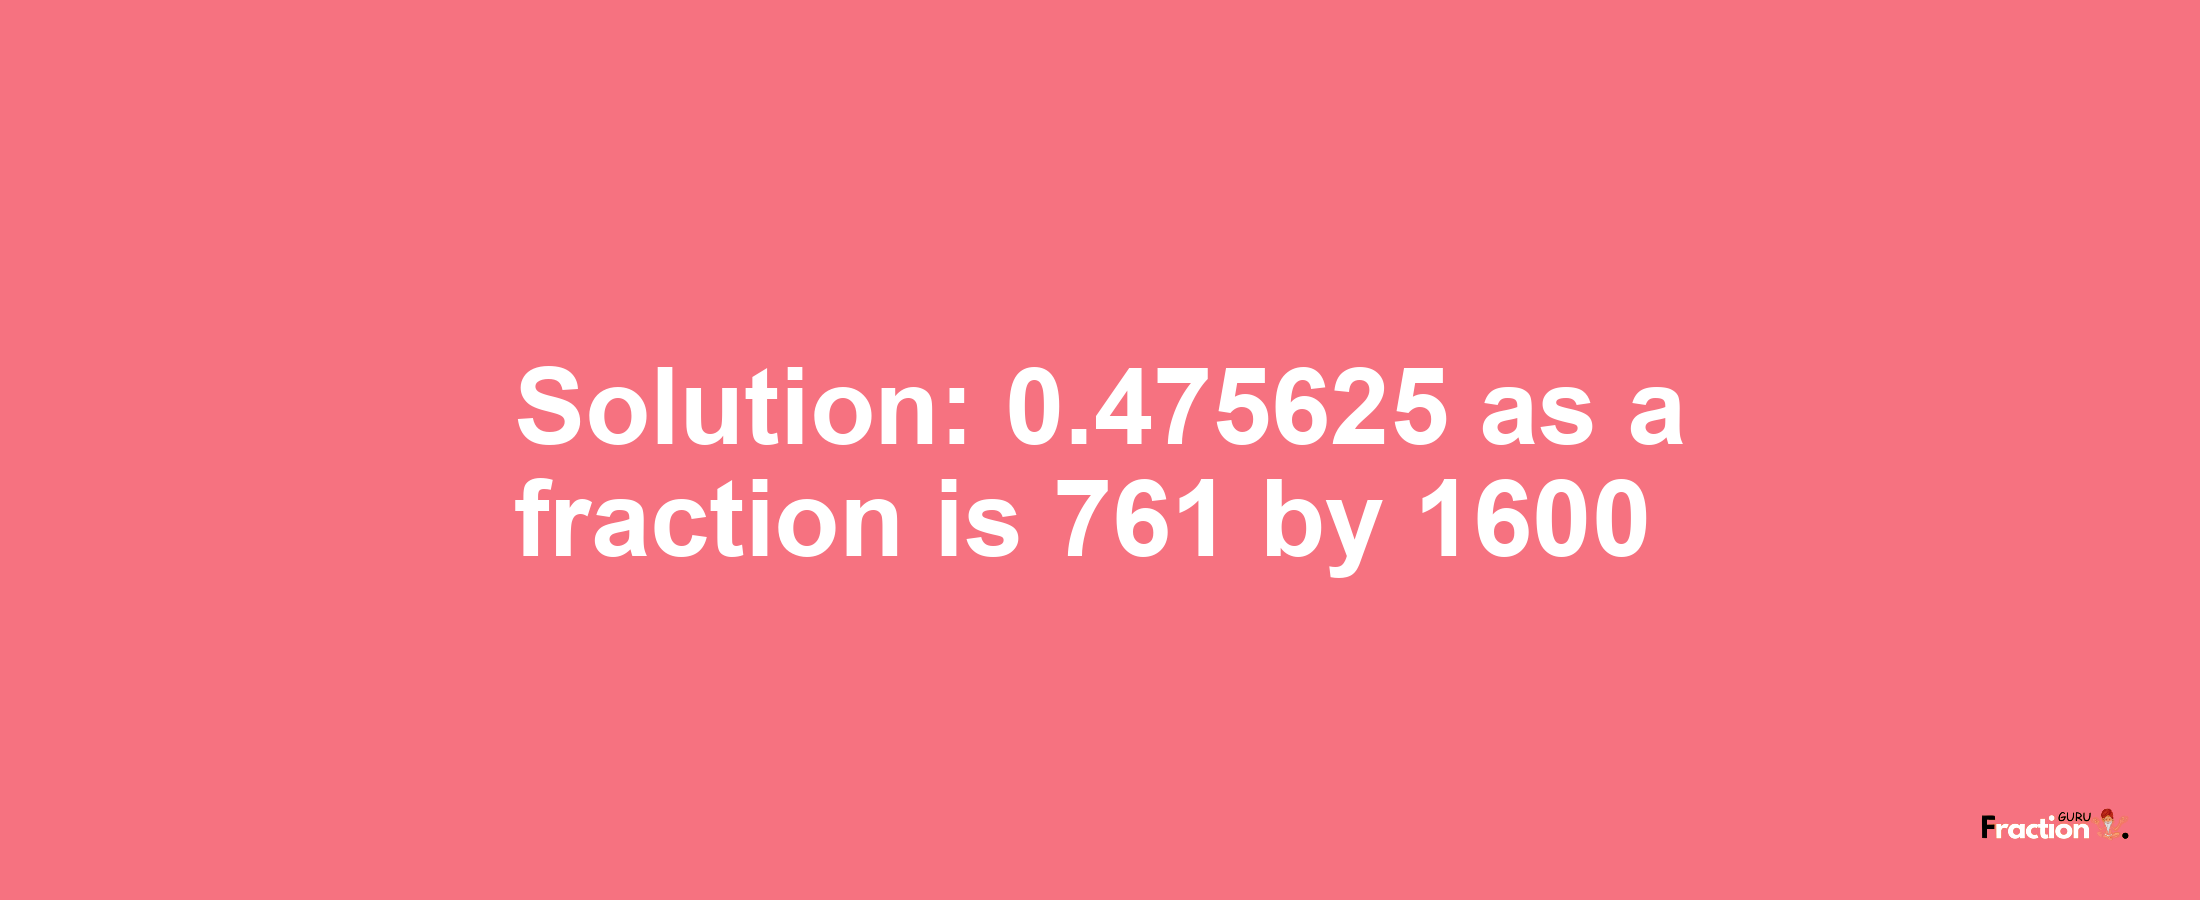 Solution:0.475625 as a fraction is 761/1600